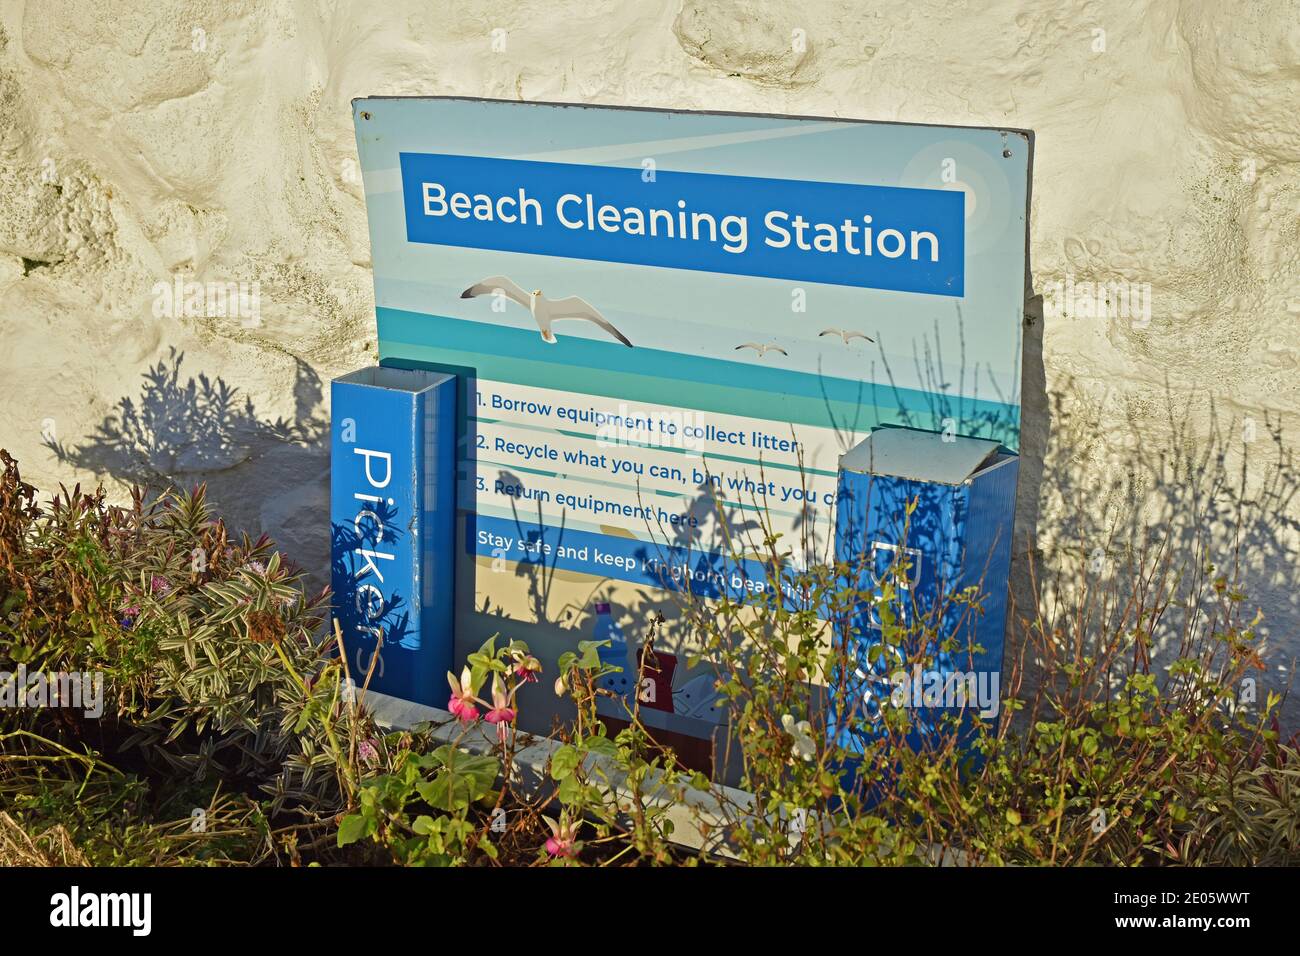 Beach cleaning station in Kinghorn, Fife, Scotland, UK. Containing equipment and instructions for volunteers to clean local beach. Stock Photo